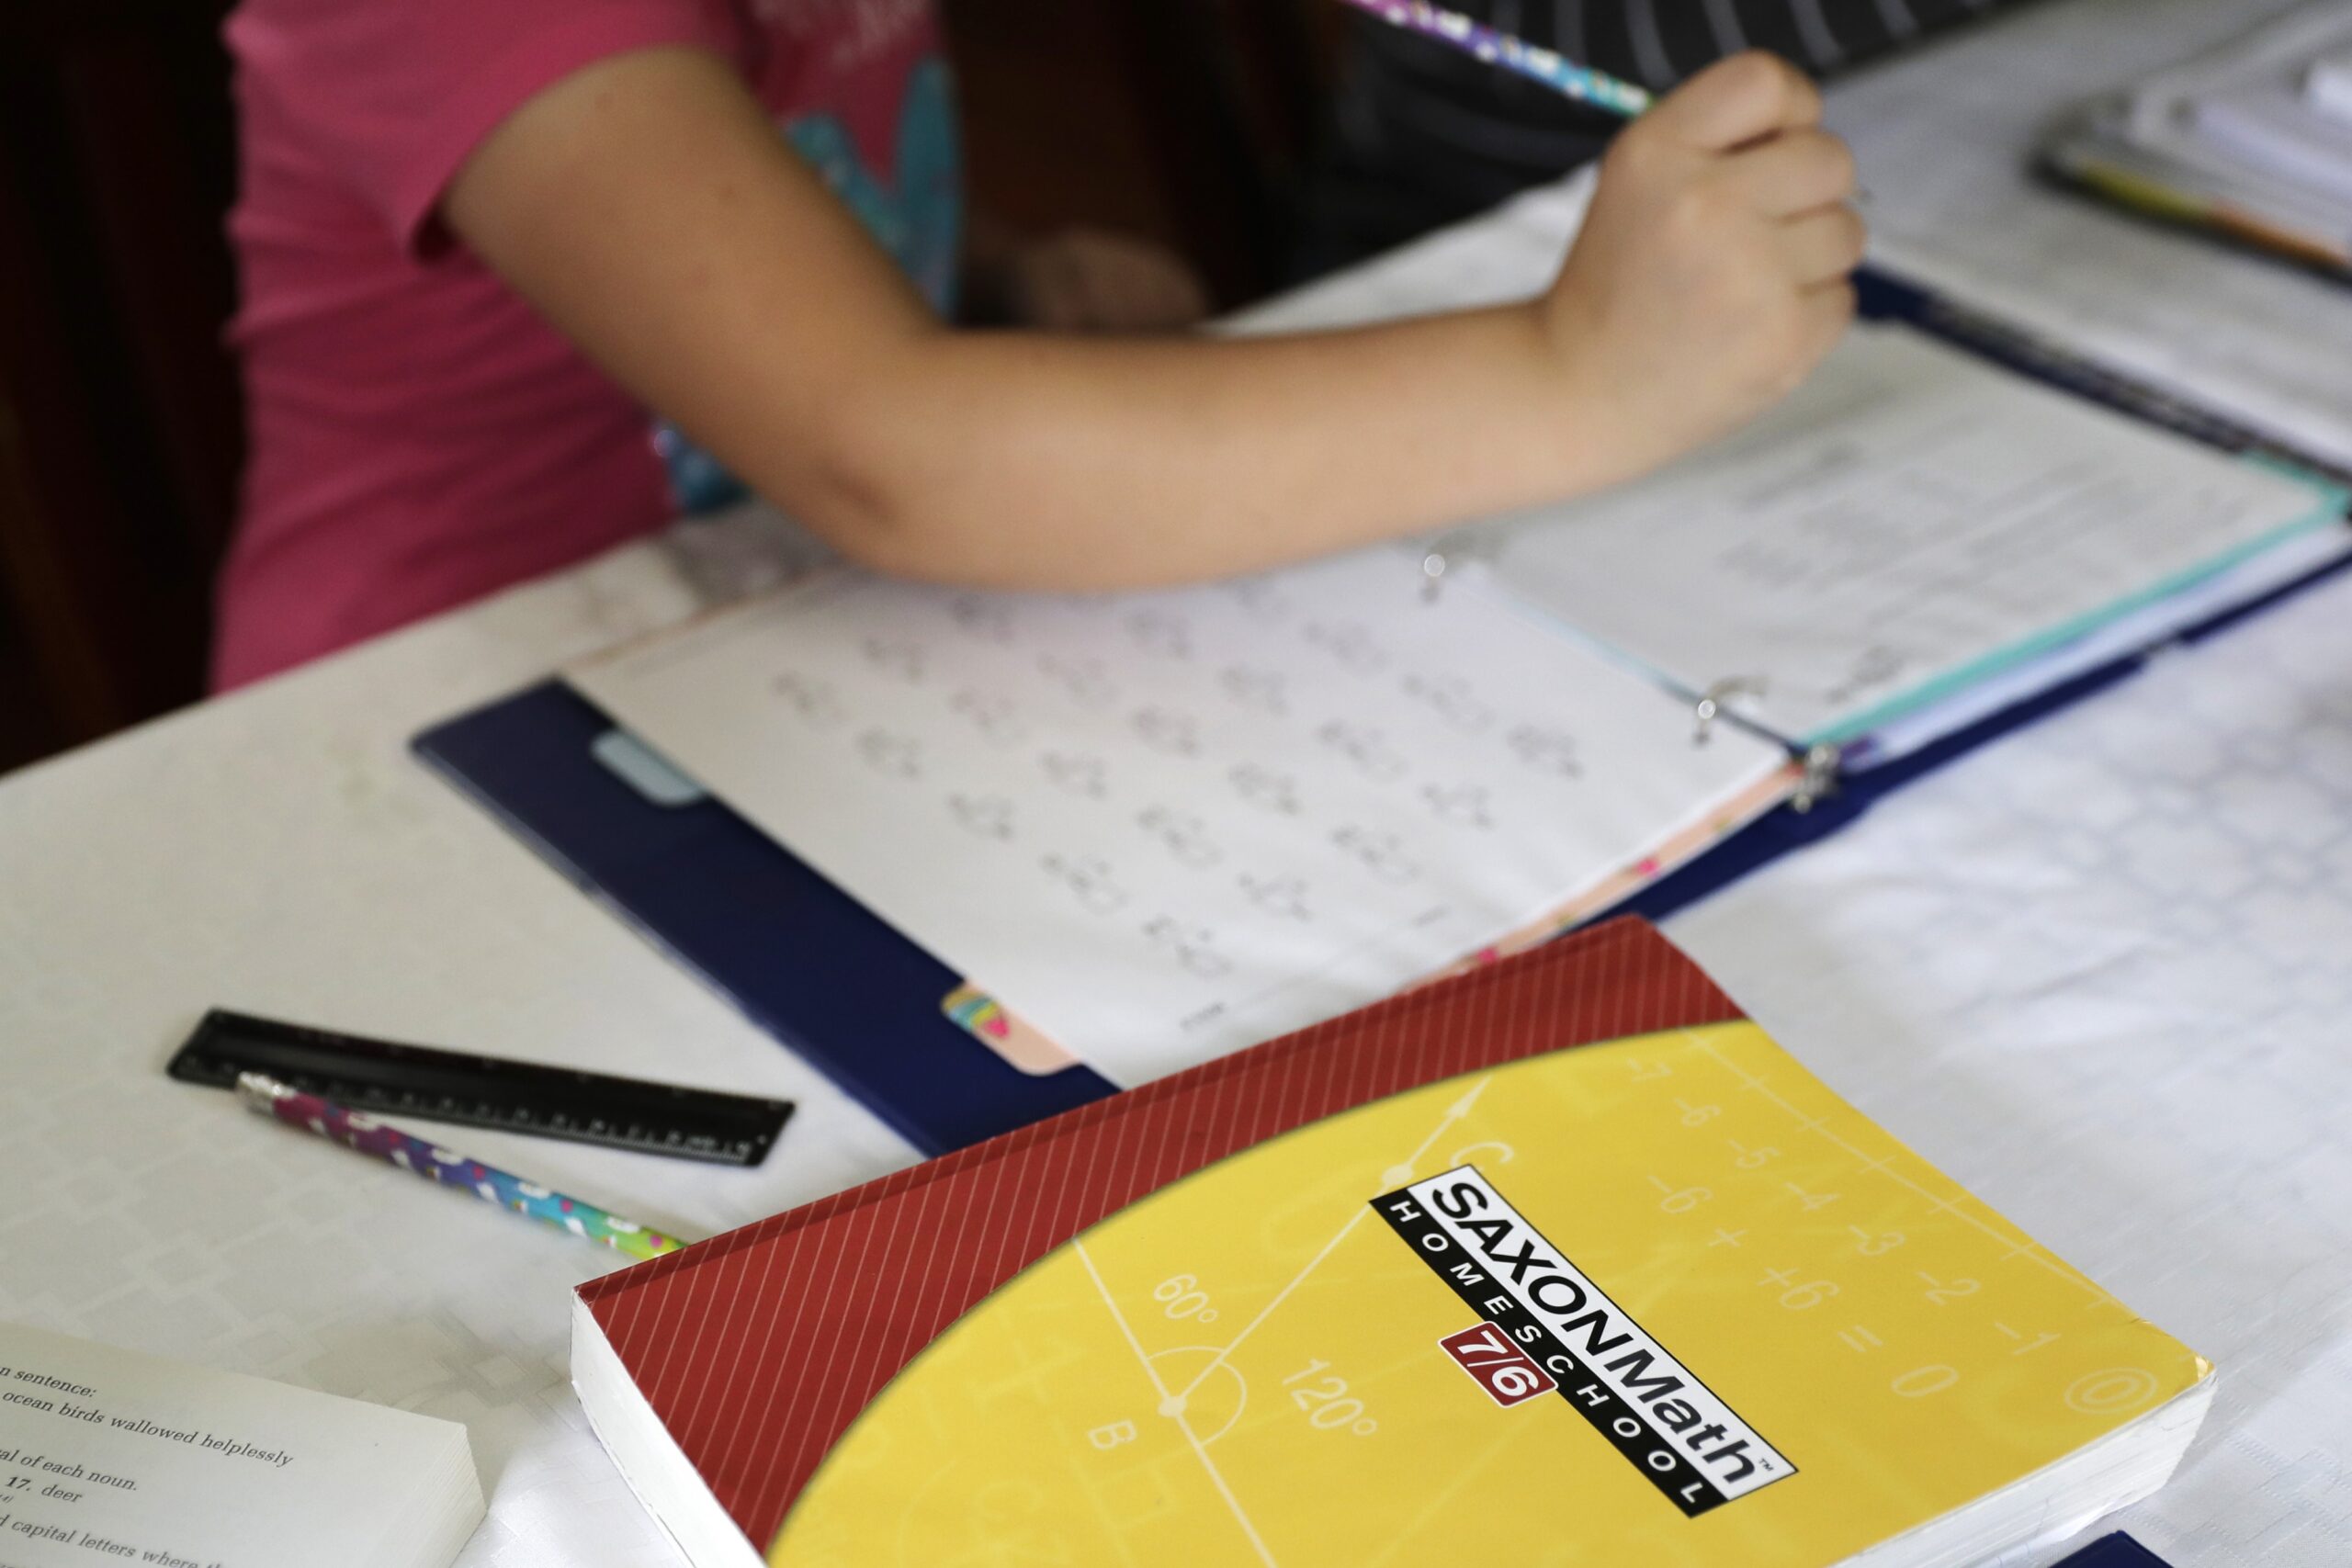 a homeschool math textbook rests on the table where Mabry Grant, 8, works on a lesson with her mom, Donya Grant